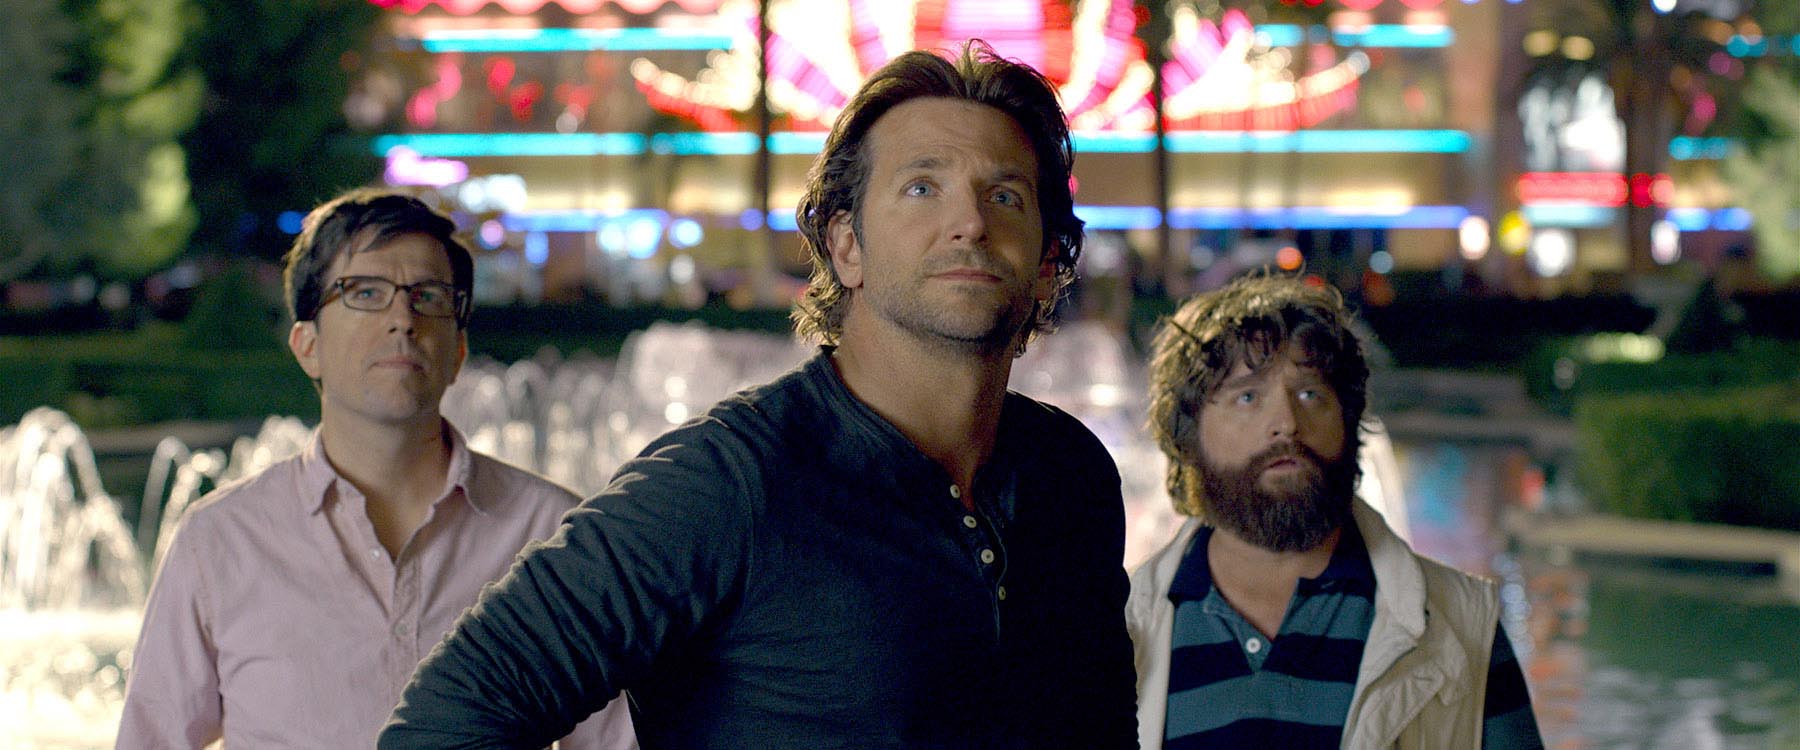 Bradley Cooper Movies: A Guide to His Most Noteworthy Films